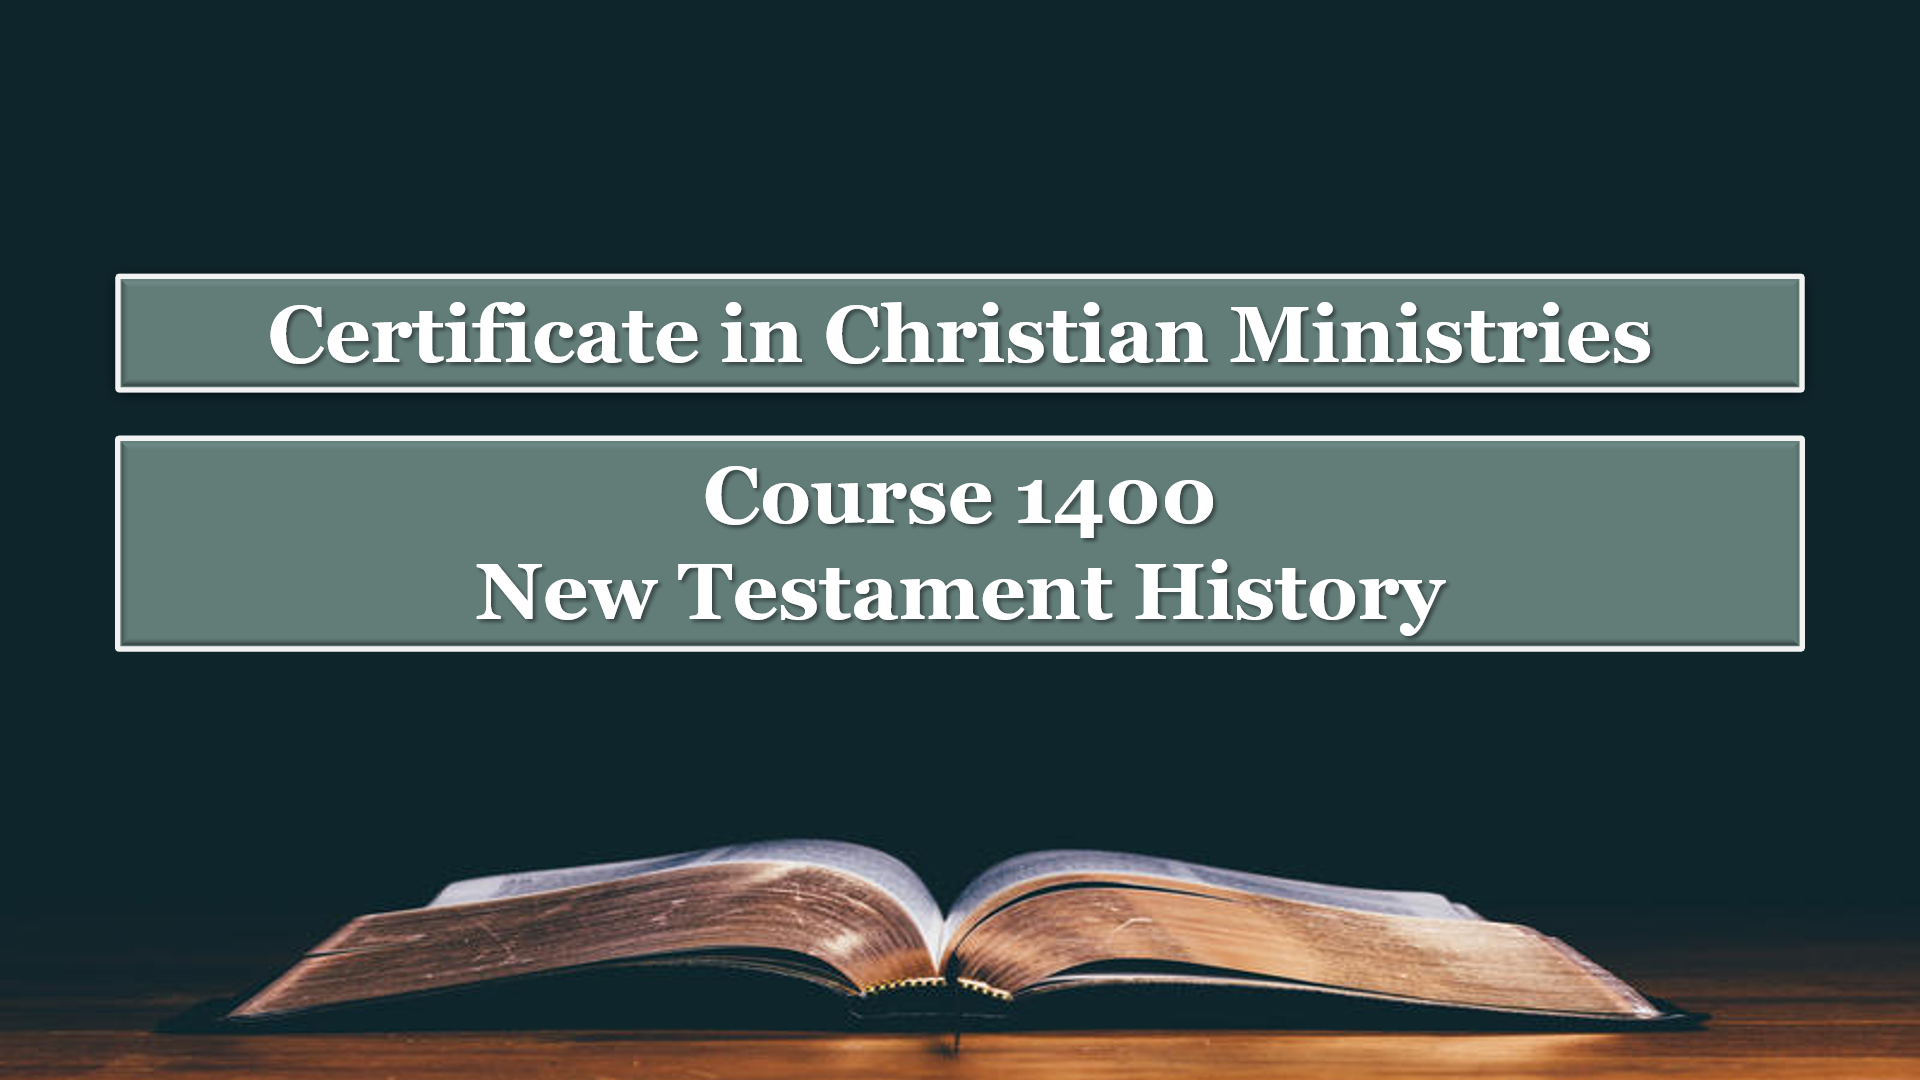 Course 1400: New Testament History